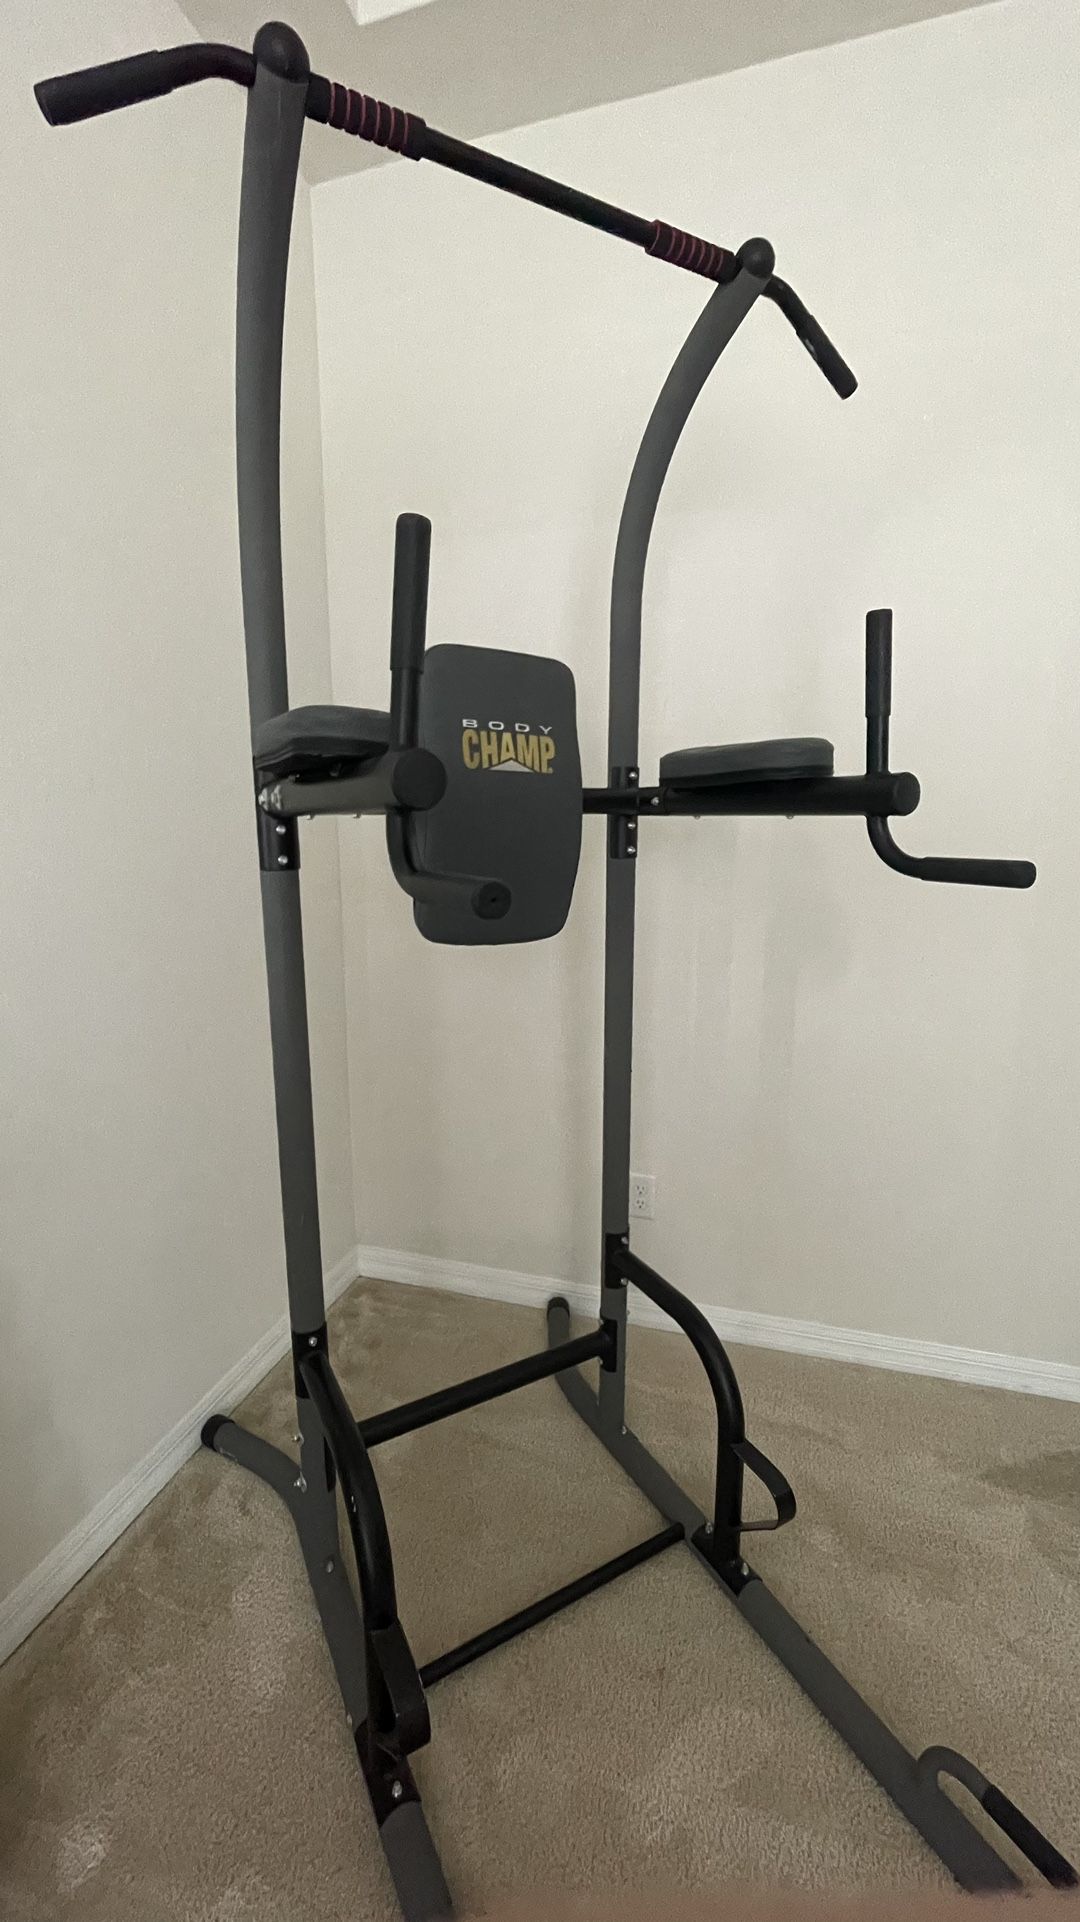 Body Champ Work Out Pull Up Bar Home Gym 